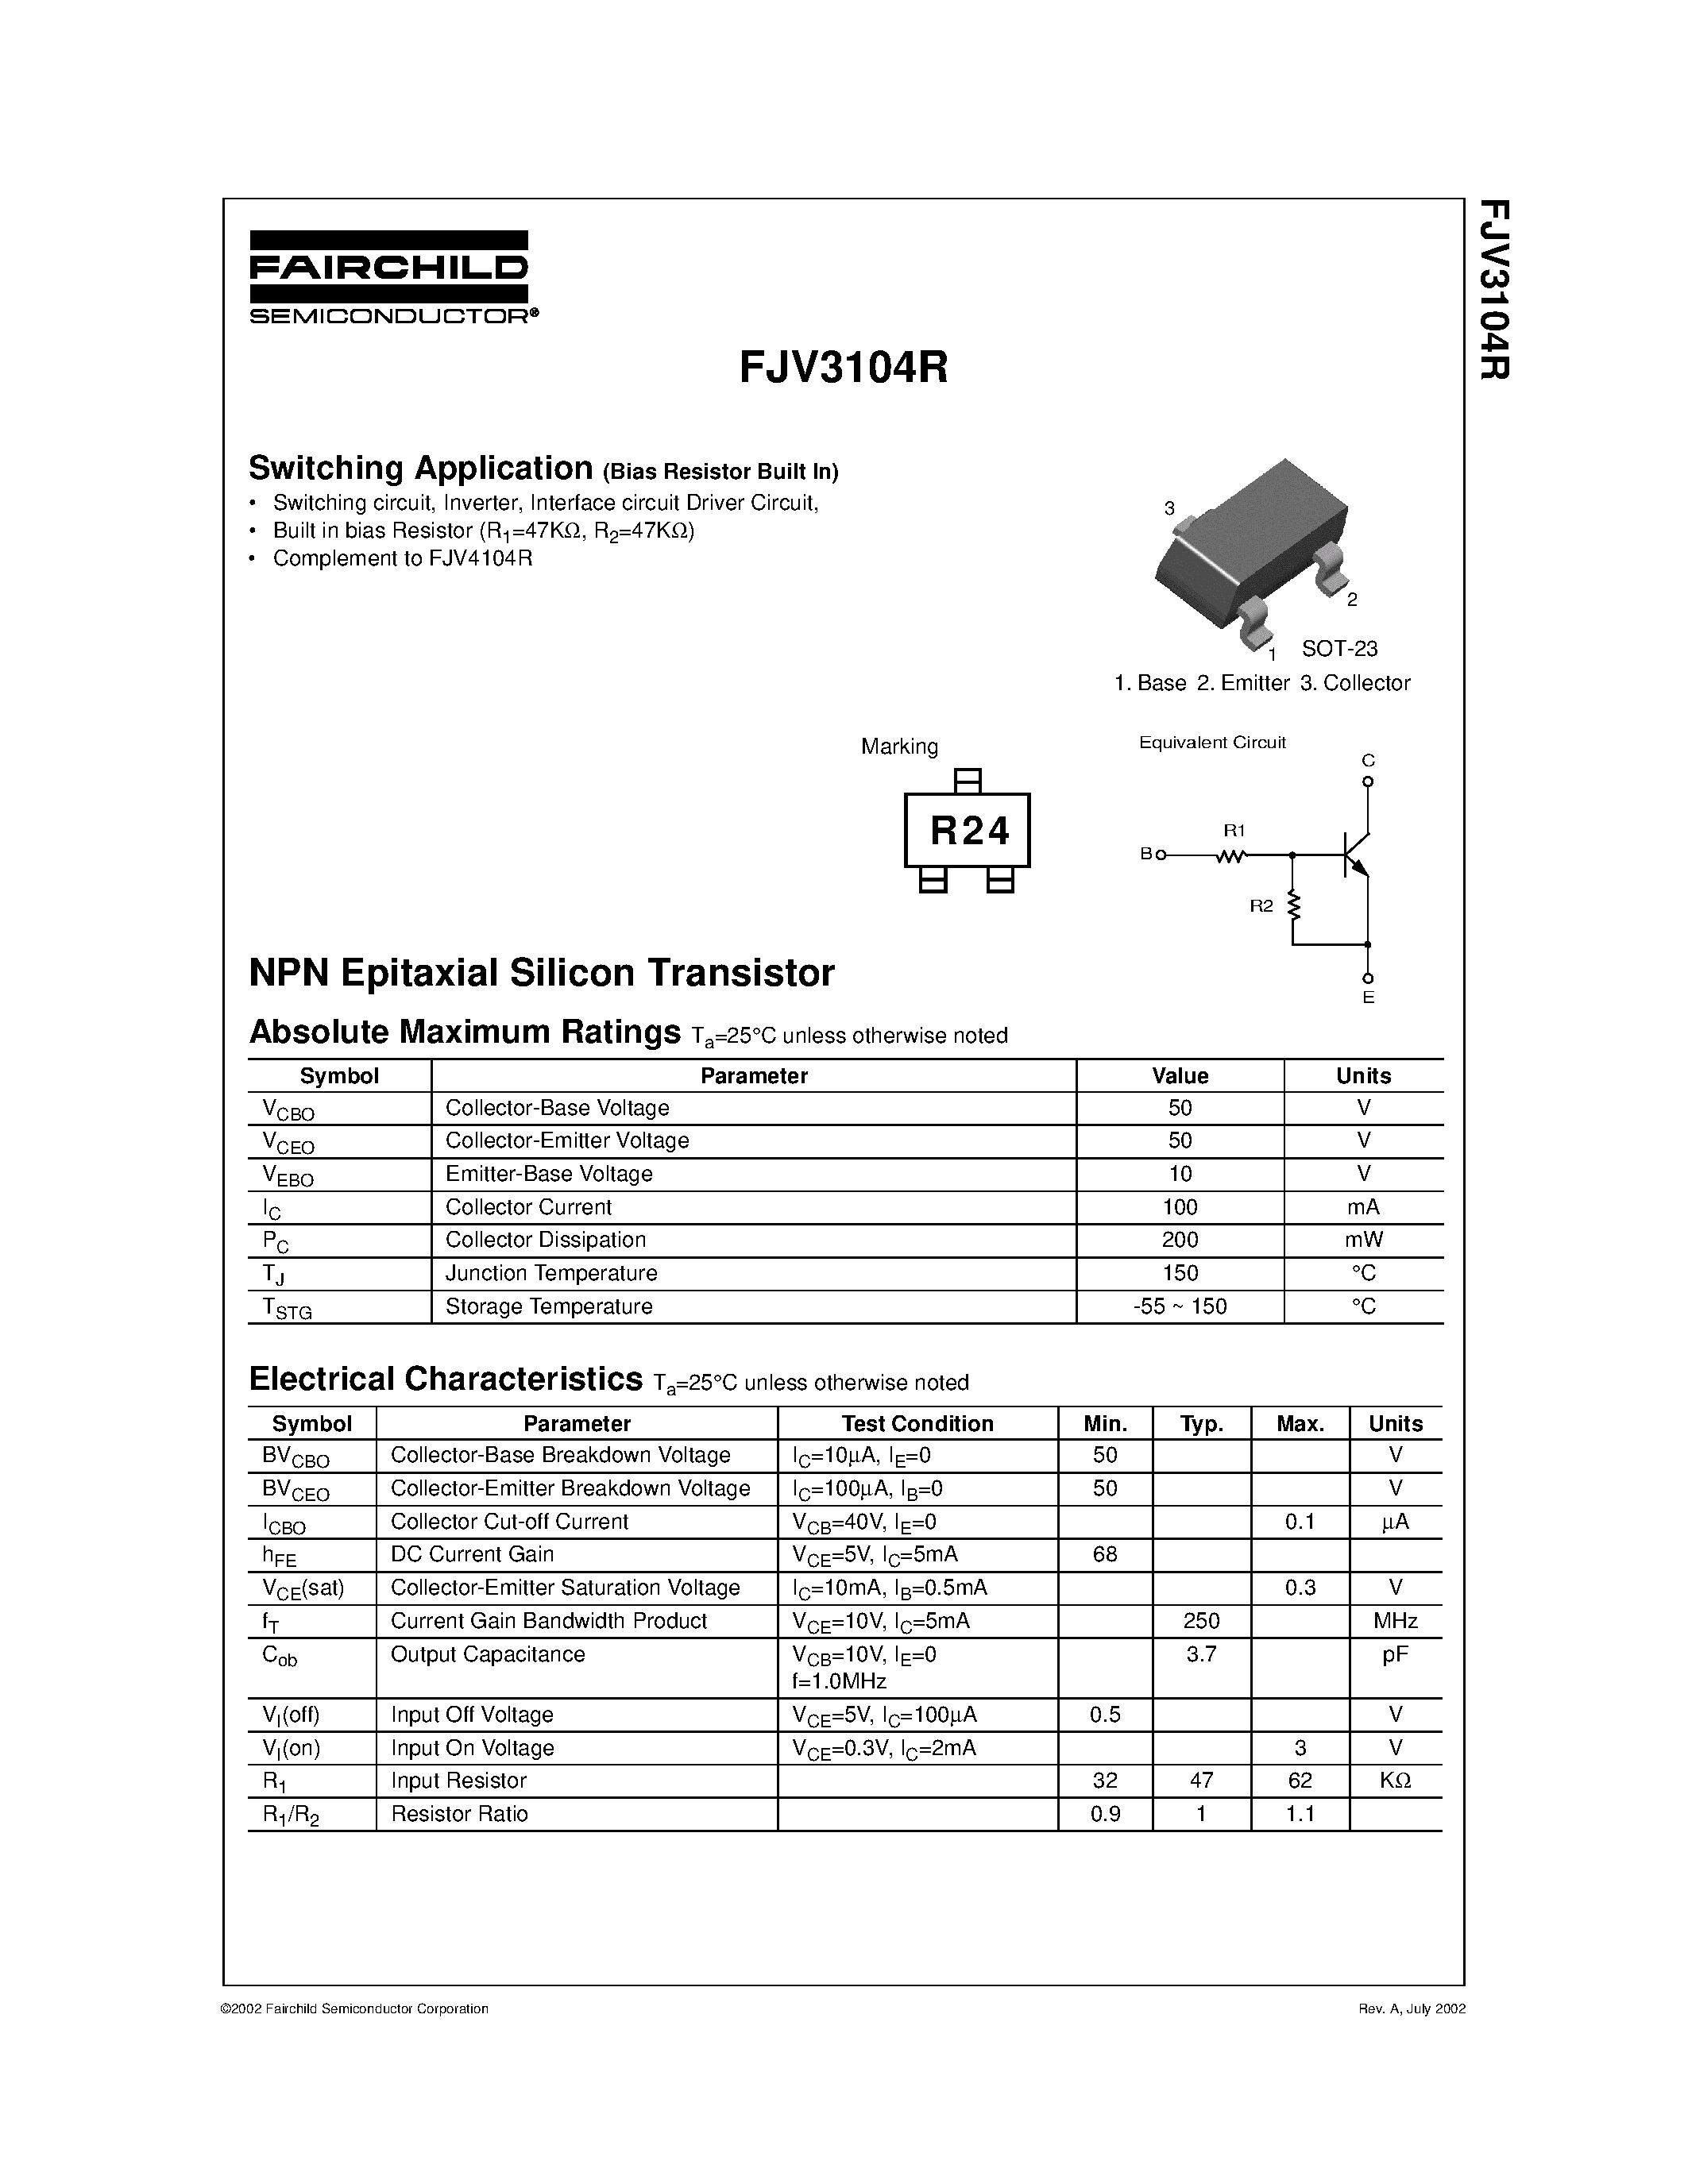 Datasheet FJV3104R - NPN Epitaxial Silicon Transistor page 1